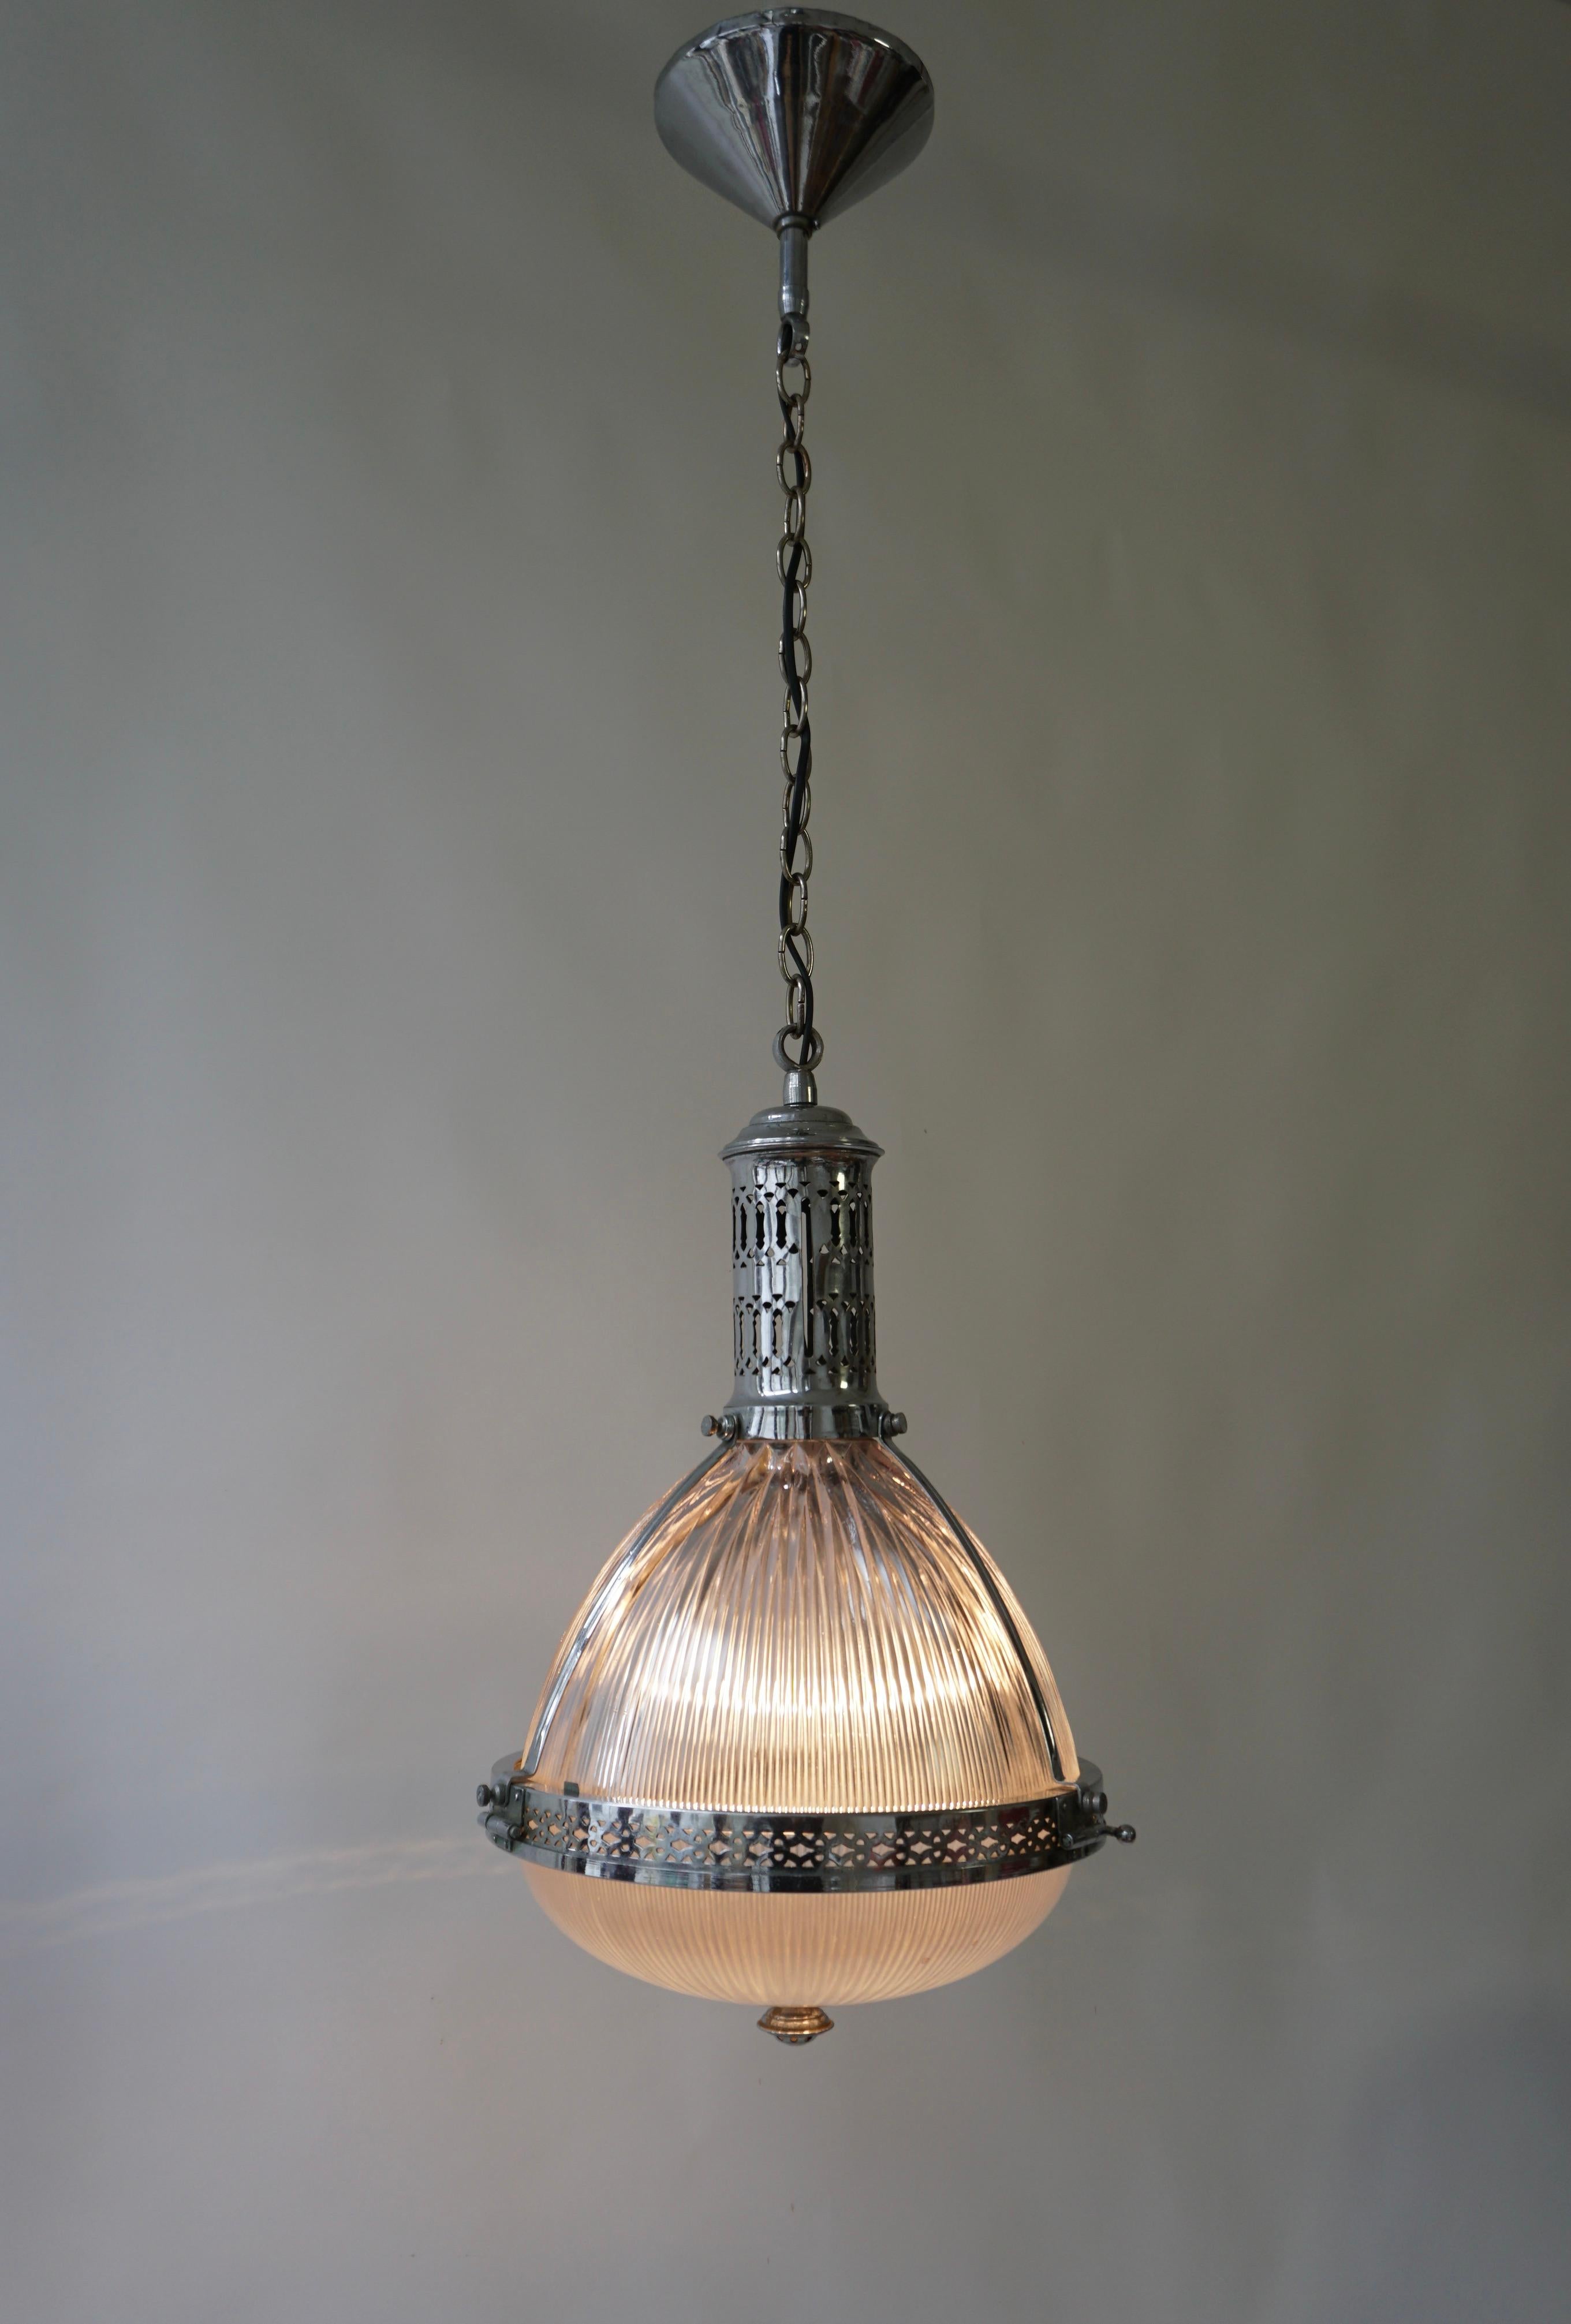 Beautifully formed pendant light made in England by Holophane. c.1920.

The lamp has one socket for incandescent lamps with screw base or E27 type LEDs. It is possible to install this fixture in all countries (US, UK, Europe, Asia, Canada), although